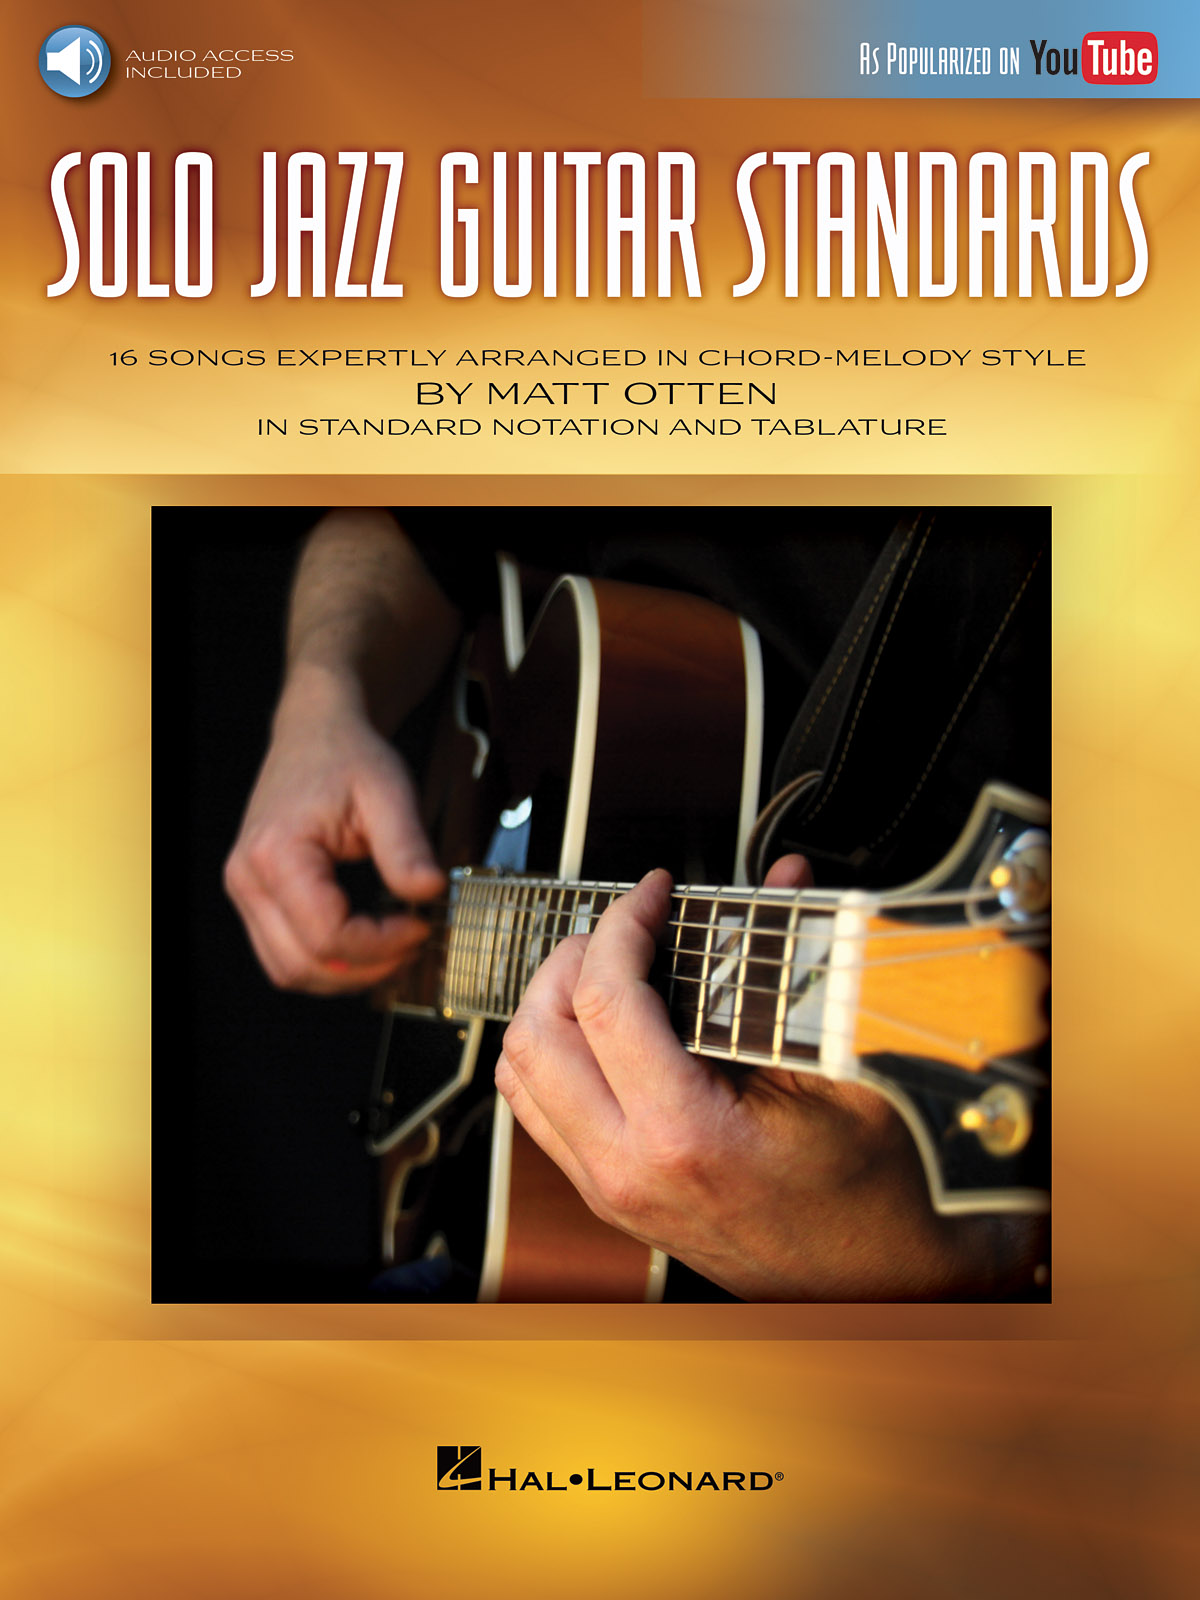 Solo Jazz Guitar Standards - 16 Songs Expertly Arranged in Chord-Melody Style As Popularized on YouTube! - noty na kytaru